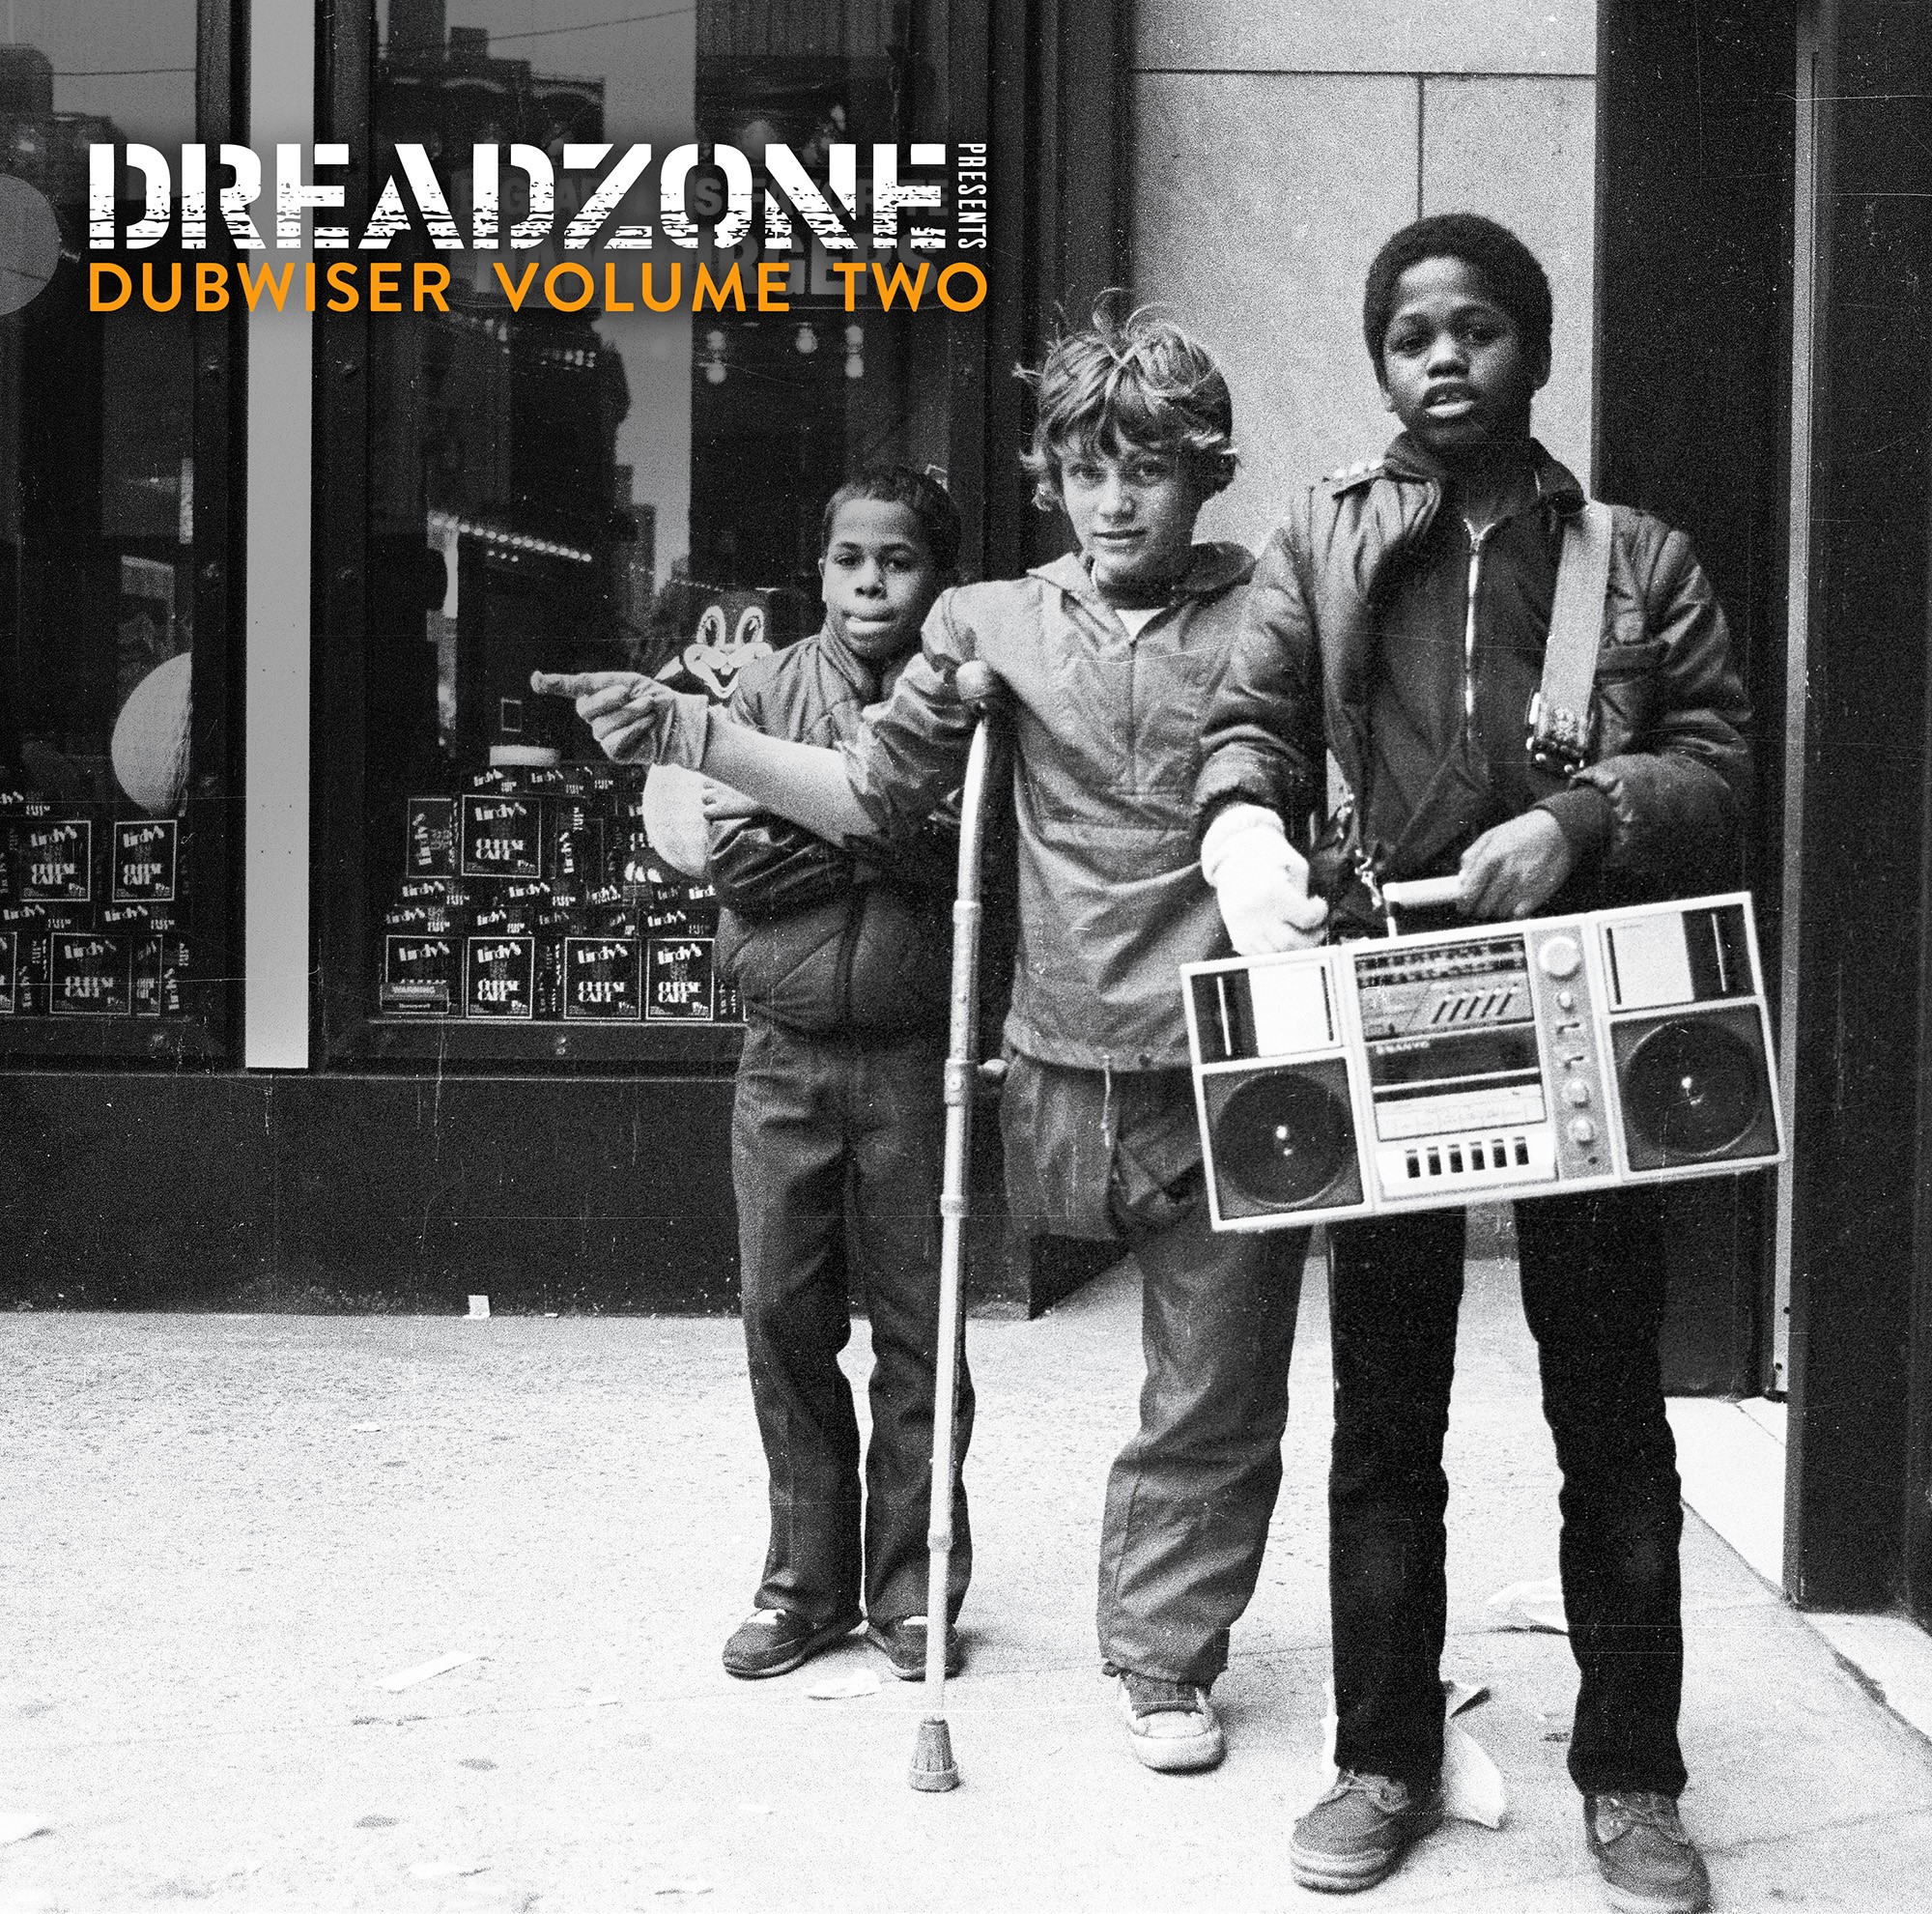 Single of the week – Dreadzone & Emily Capell – Dread Town